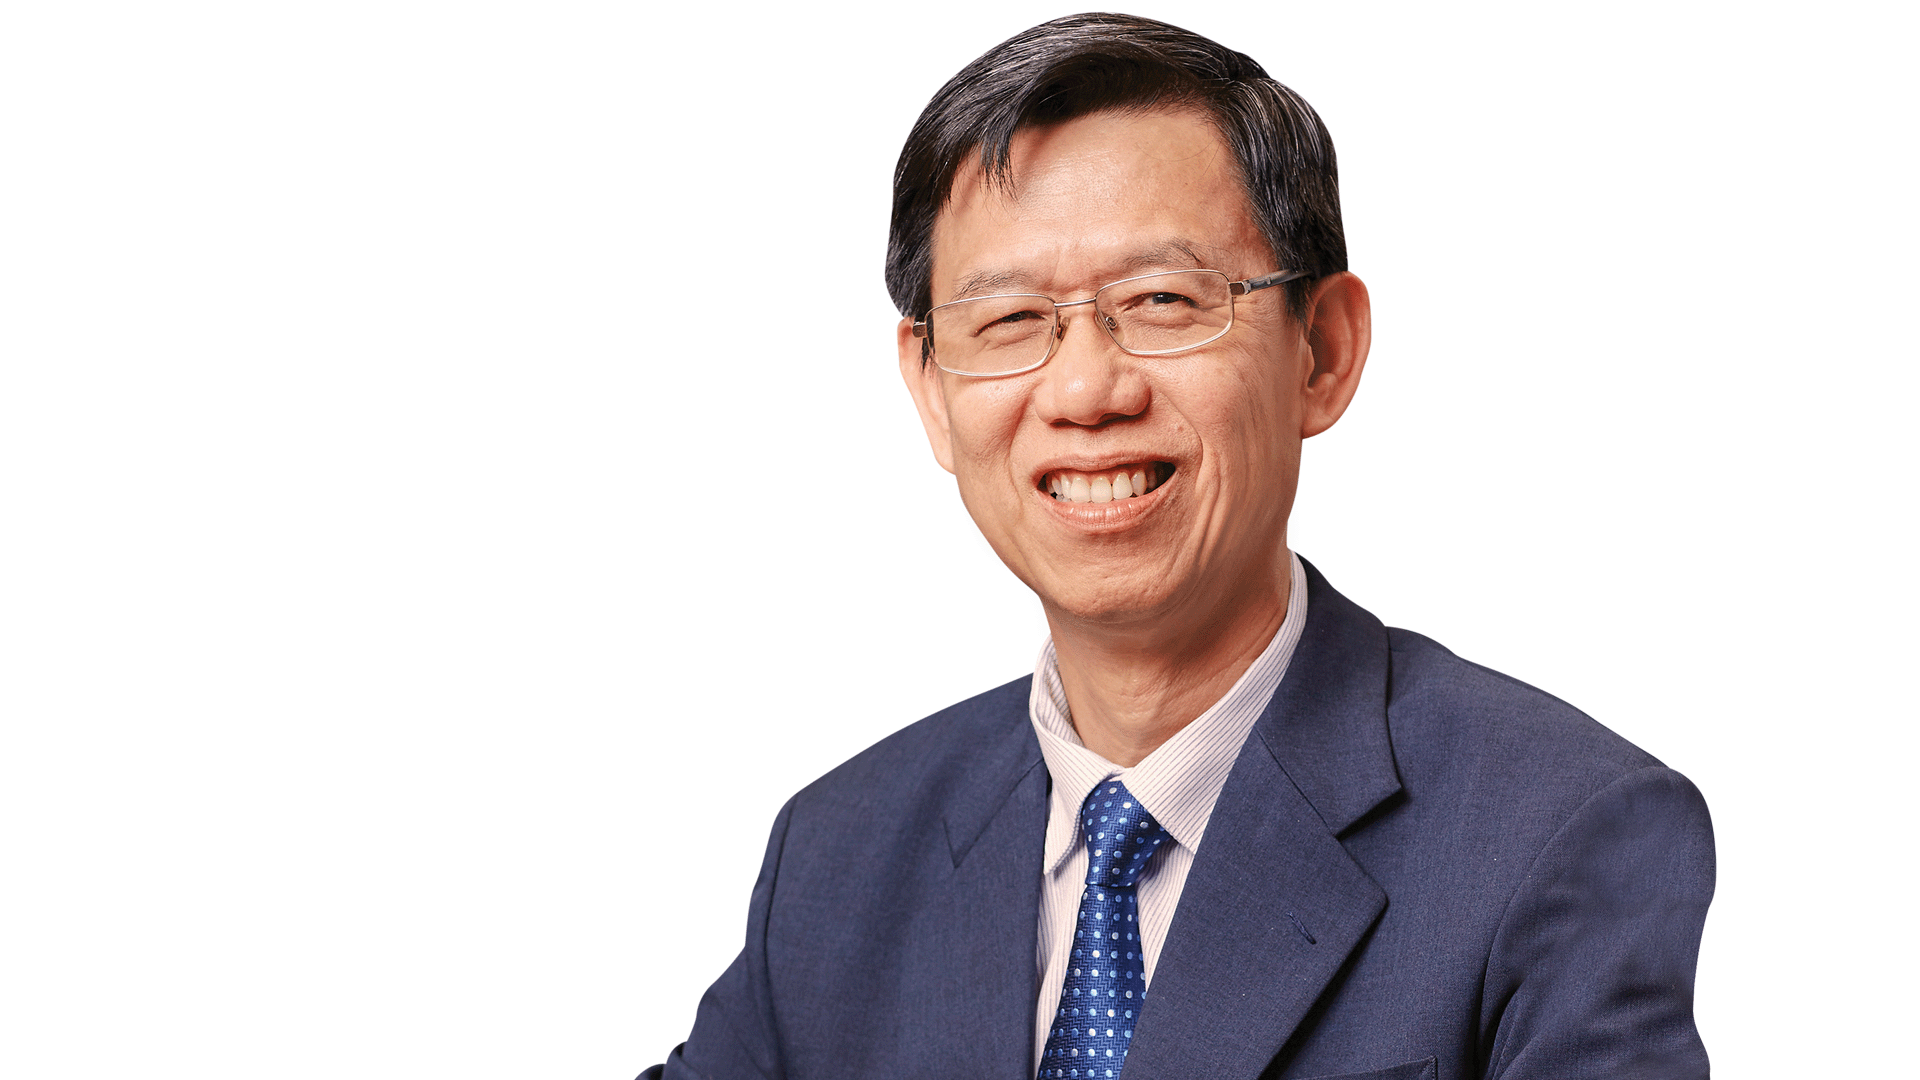 Throughout his career, Adj Prof Quek Gim Pew  has been a leading figure in the development of advanced defence technologies and a strong advocate of STEM education.